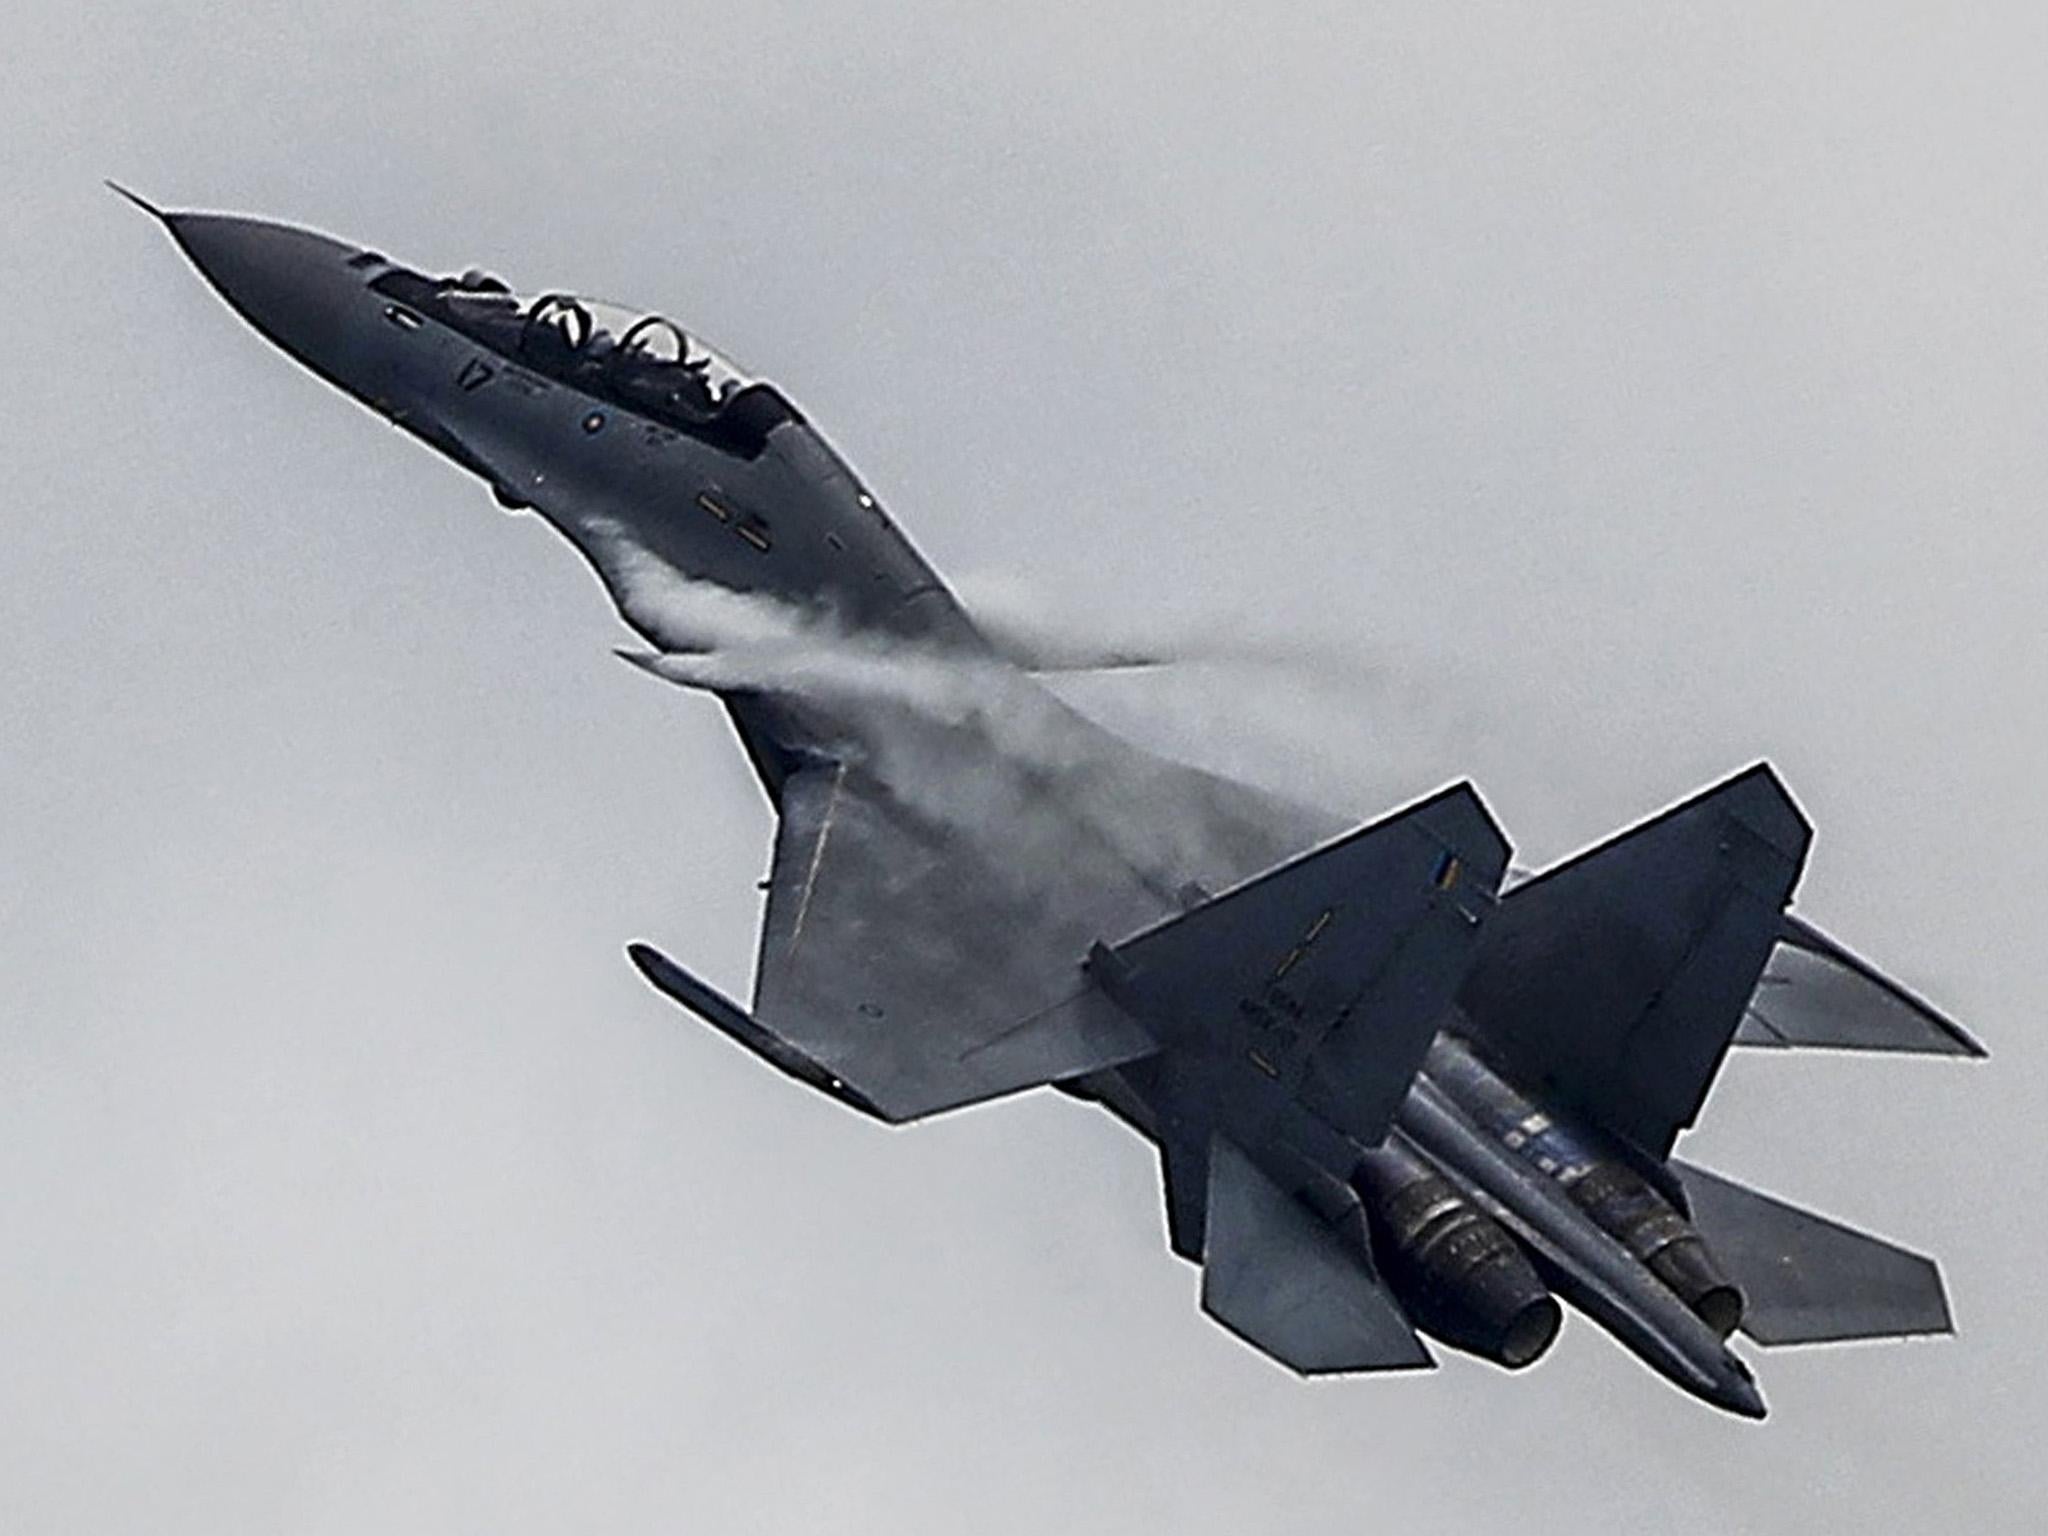 A Sukhoi SU-30 jet fighter similar to the ones used by the Chinese air force